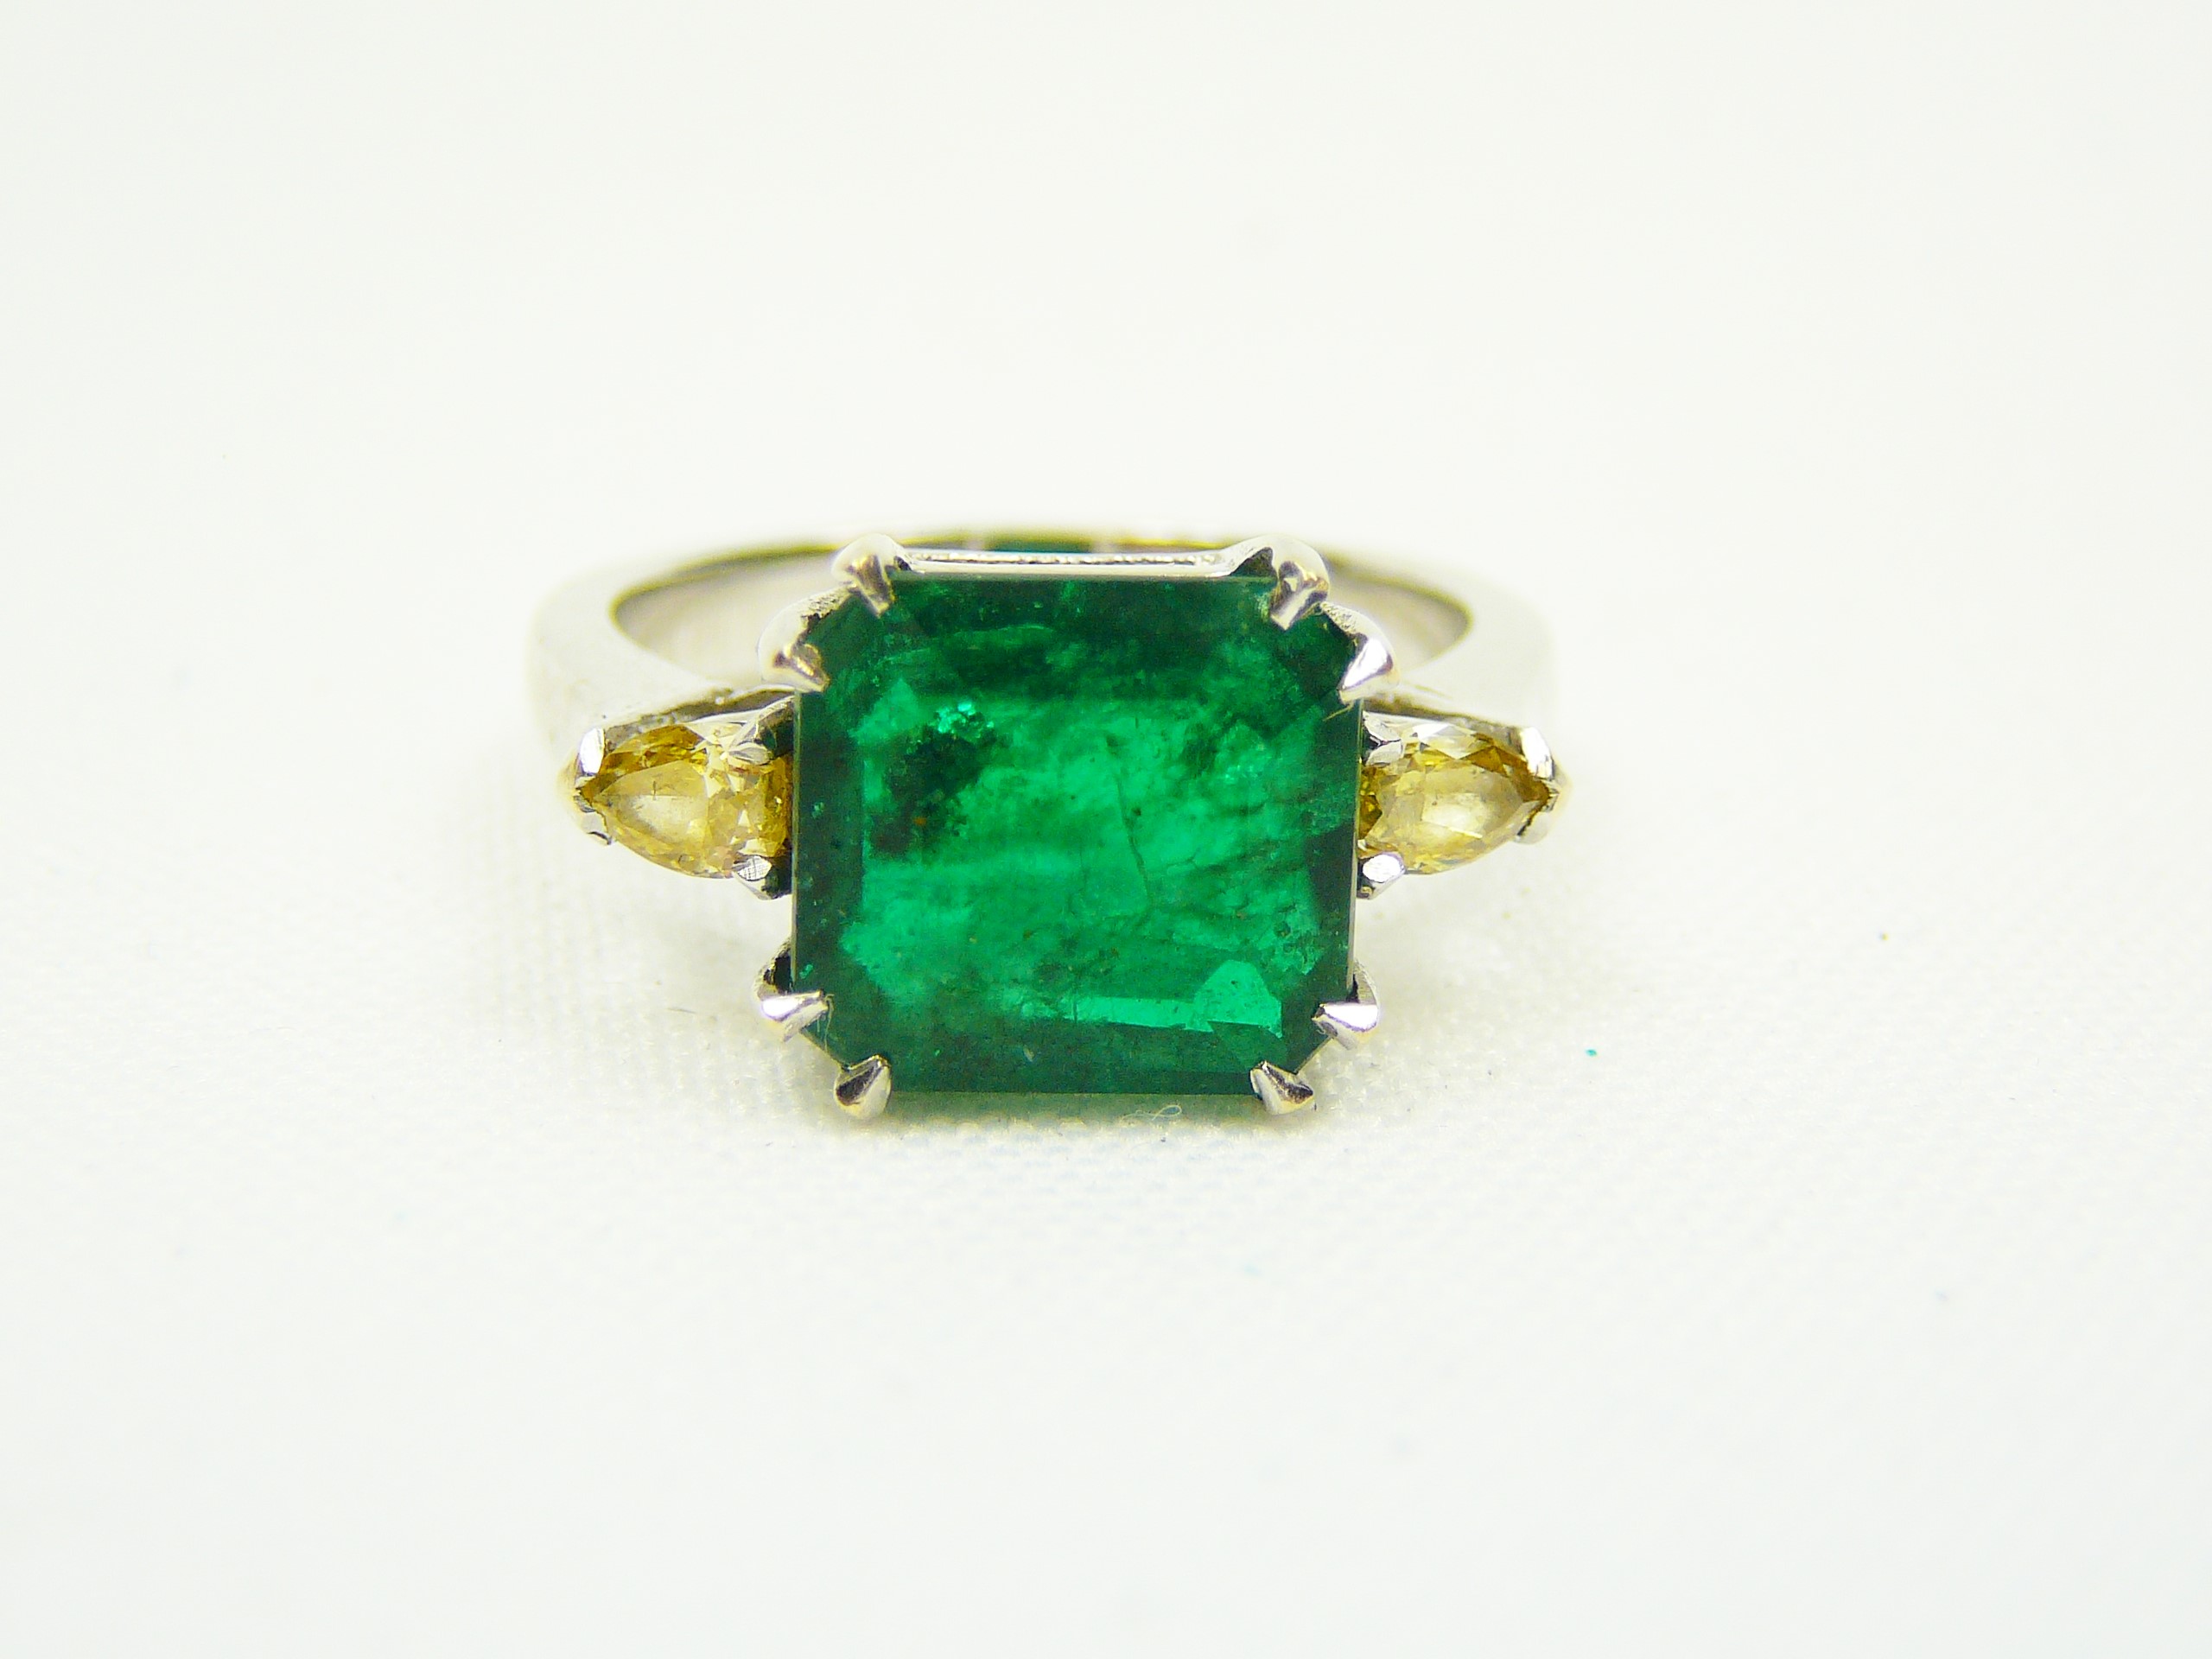 18ct white gold, emerald and diamond ring - Image 3 of 5